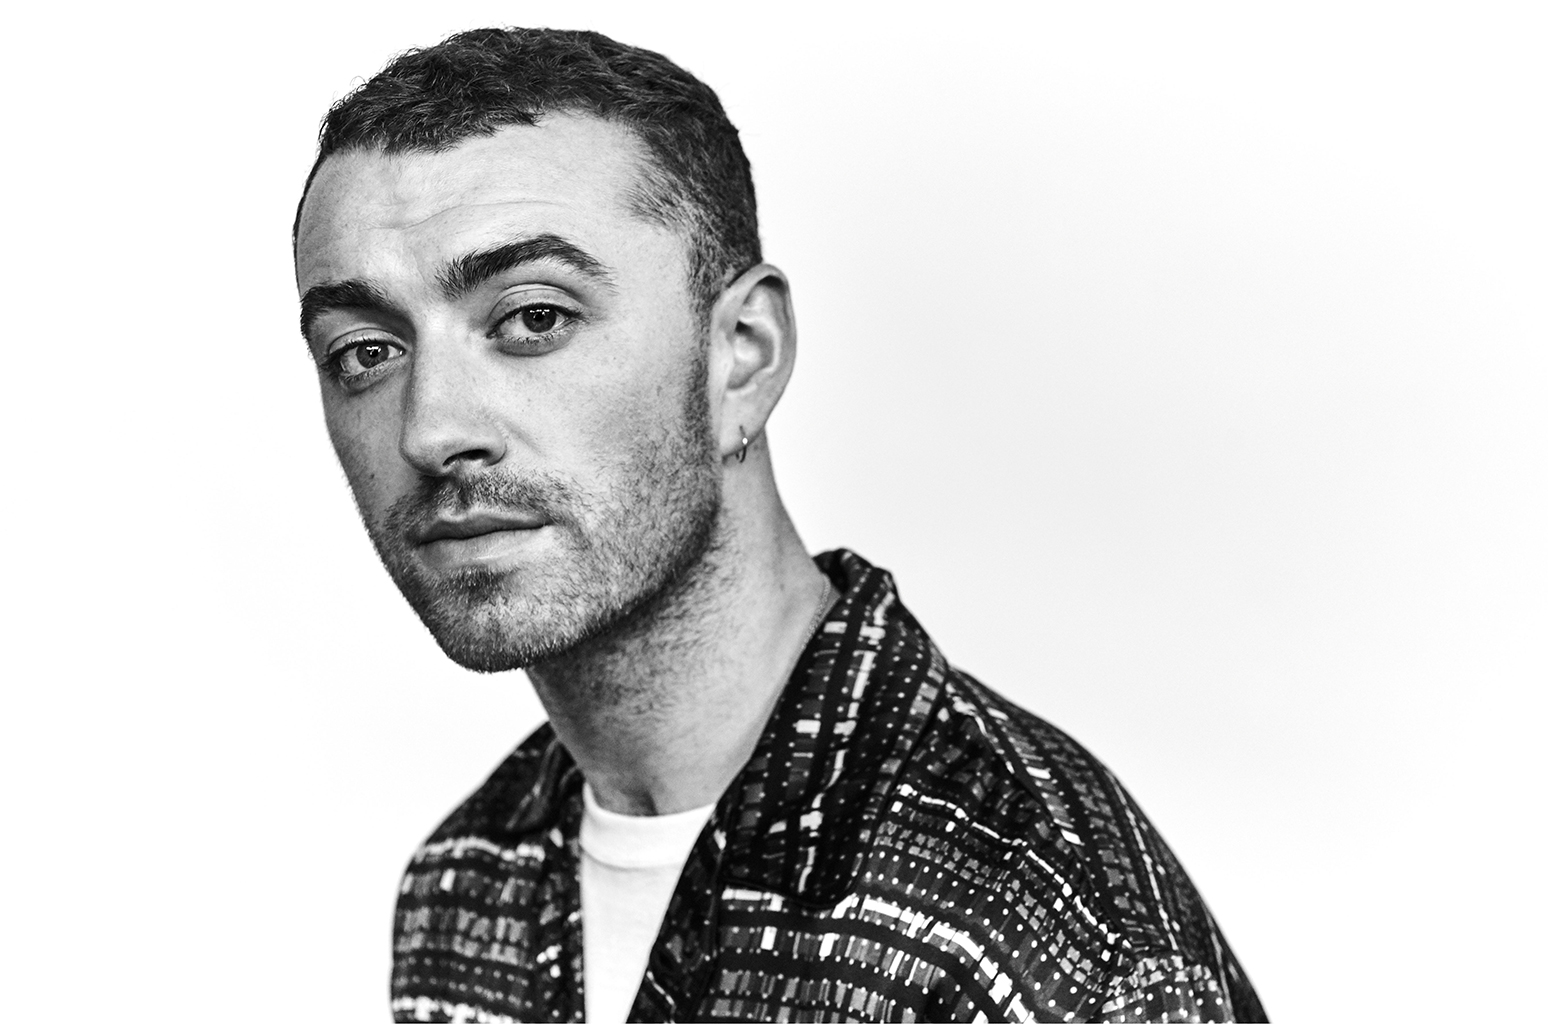 Sam-Smith-press-photo-by-Ruven-Afanador-Sept-2017-NEW-billboard-1548